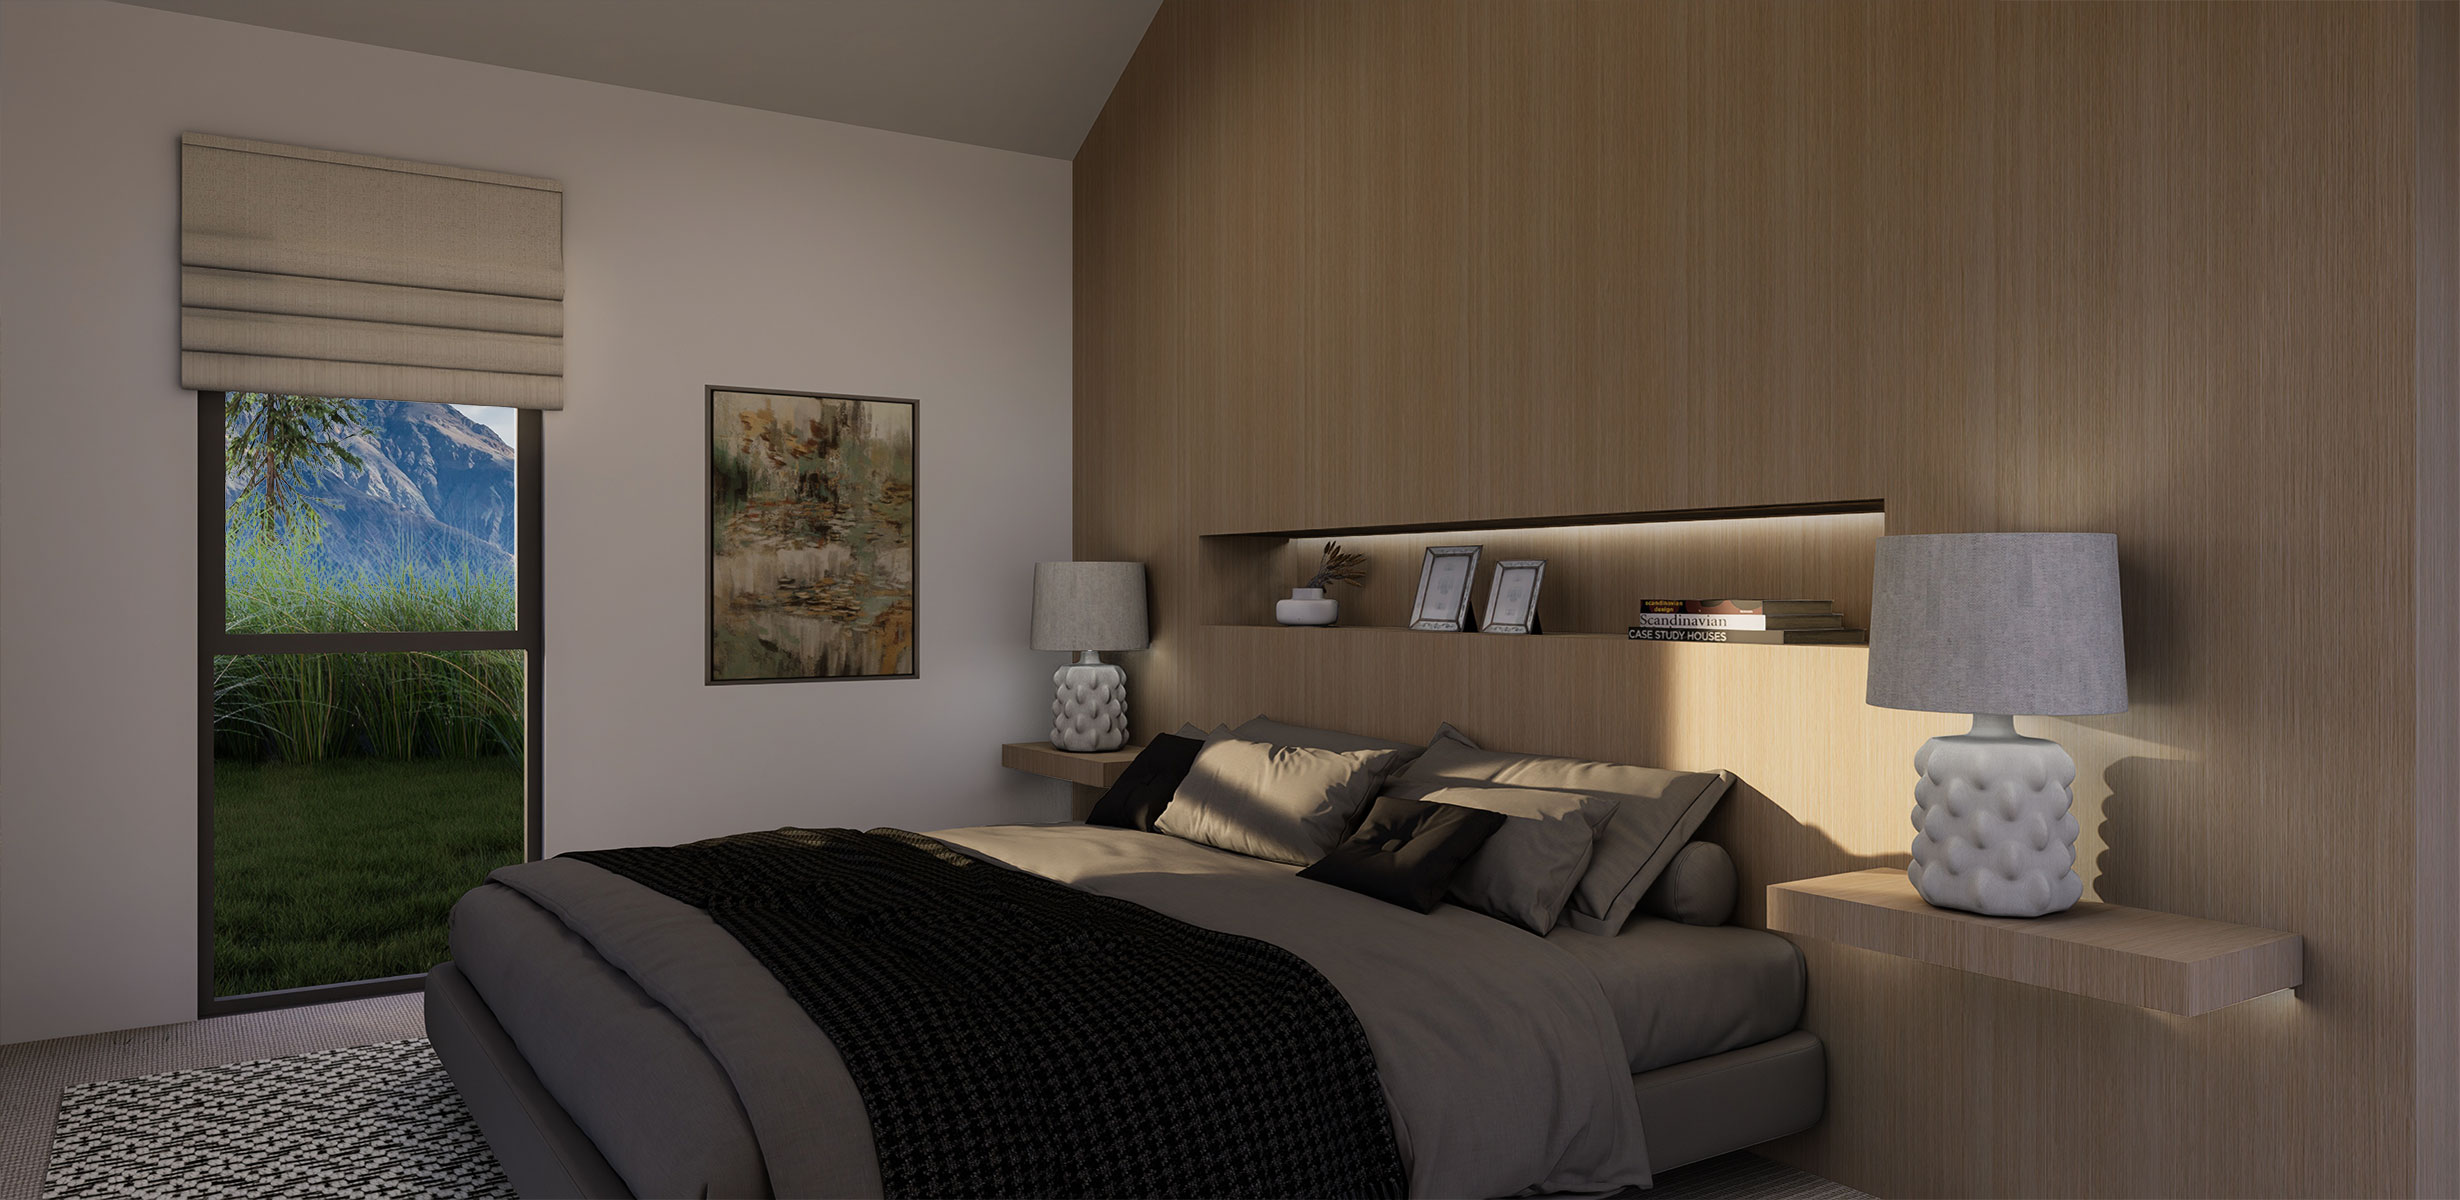 Rakaia House Plan Master Bedroom View NZ - Our spacious open plan design that seamlessly connects living areas and offers stylish functionality. Enjoy ultimate convenience.